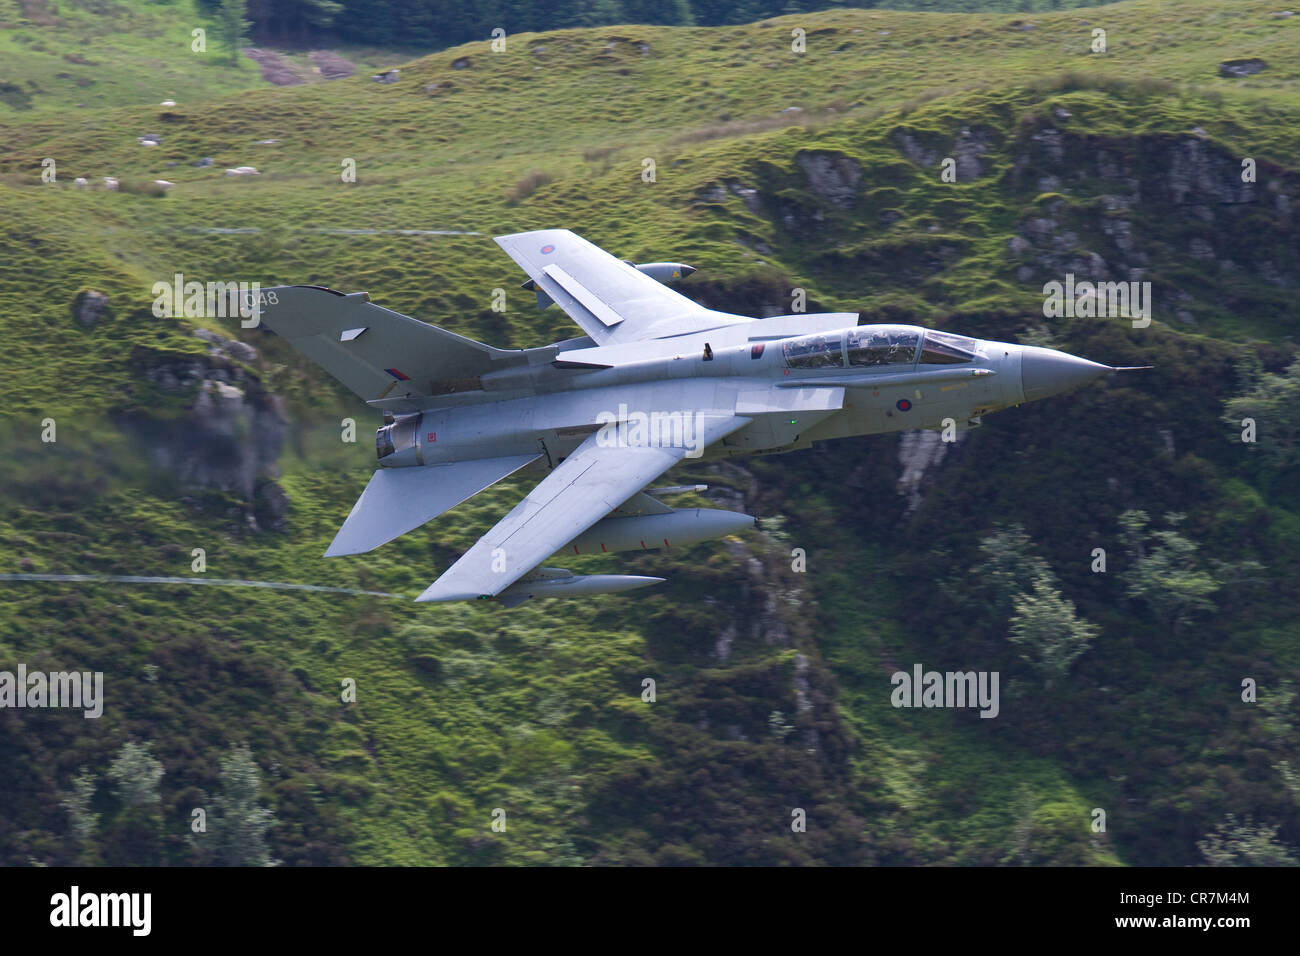 A RAF Tornado flying through the Mach Loop in Wales. Taken from Cad West. Stock Photo